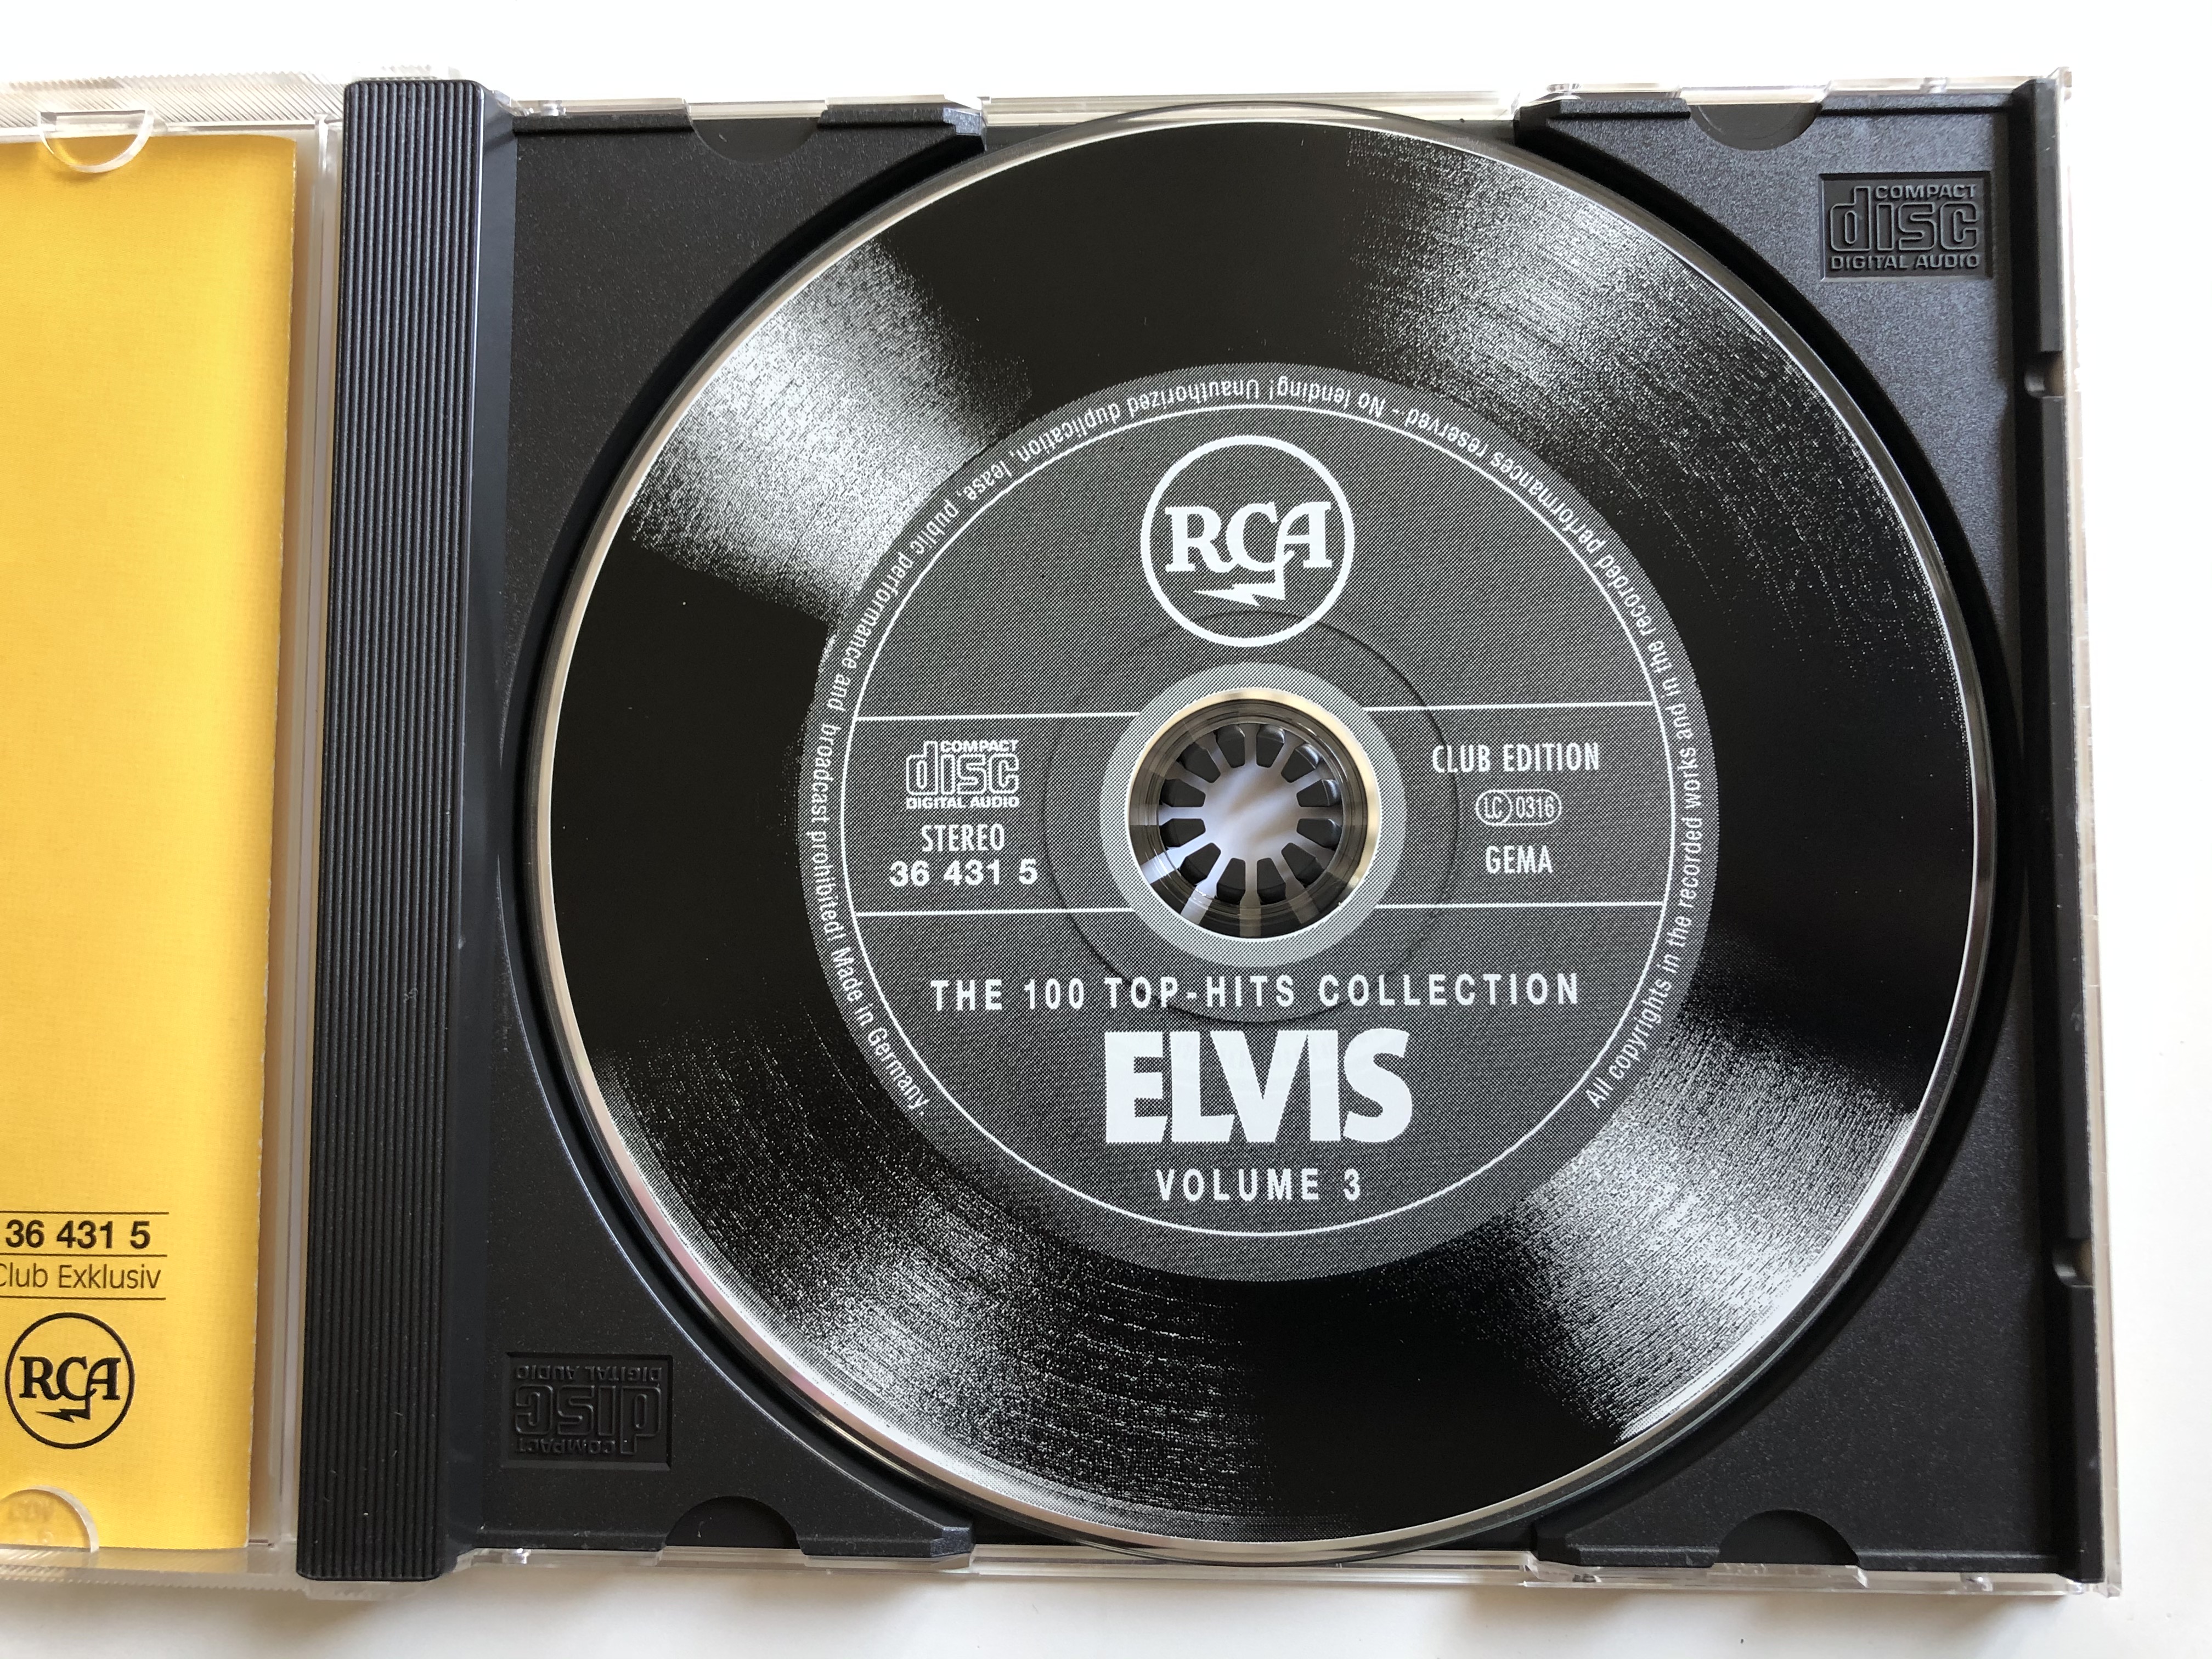 elvis-the-100-top-hits-collection-rca-5x-audio-cd-box-set-1997-stereo-36-428-1-15-.jpg